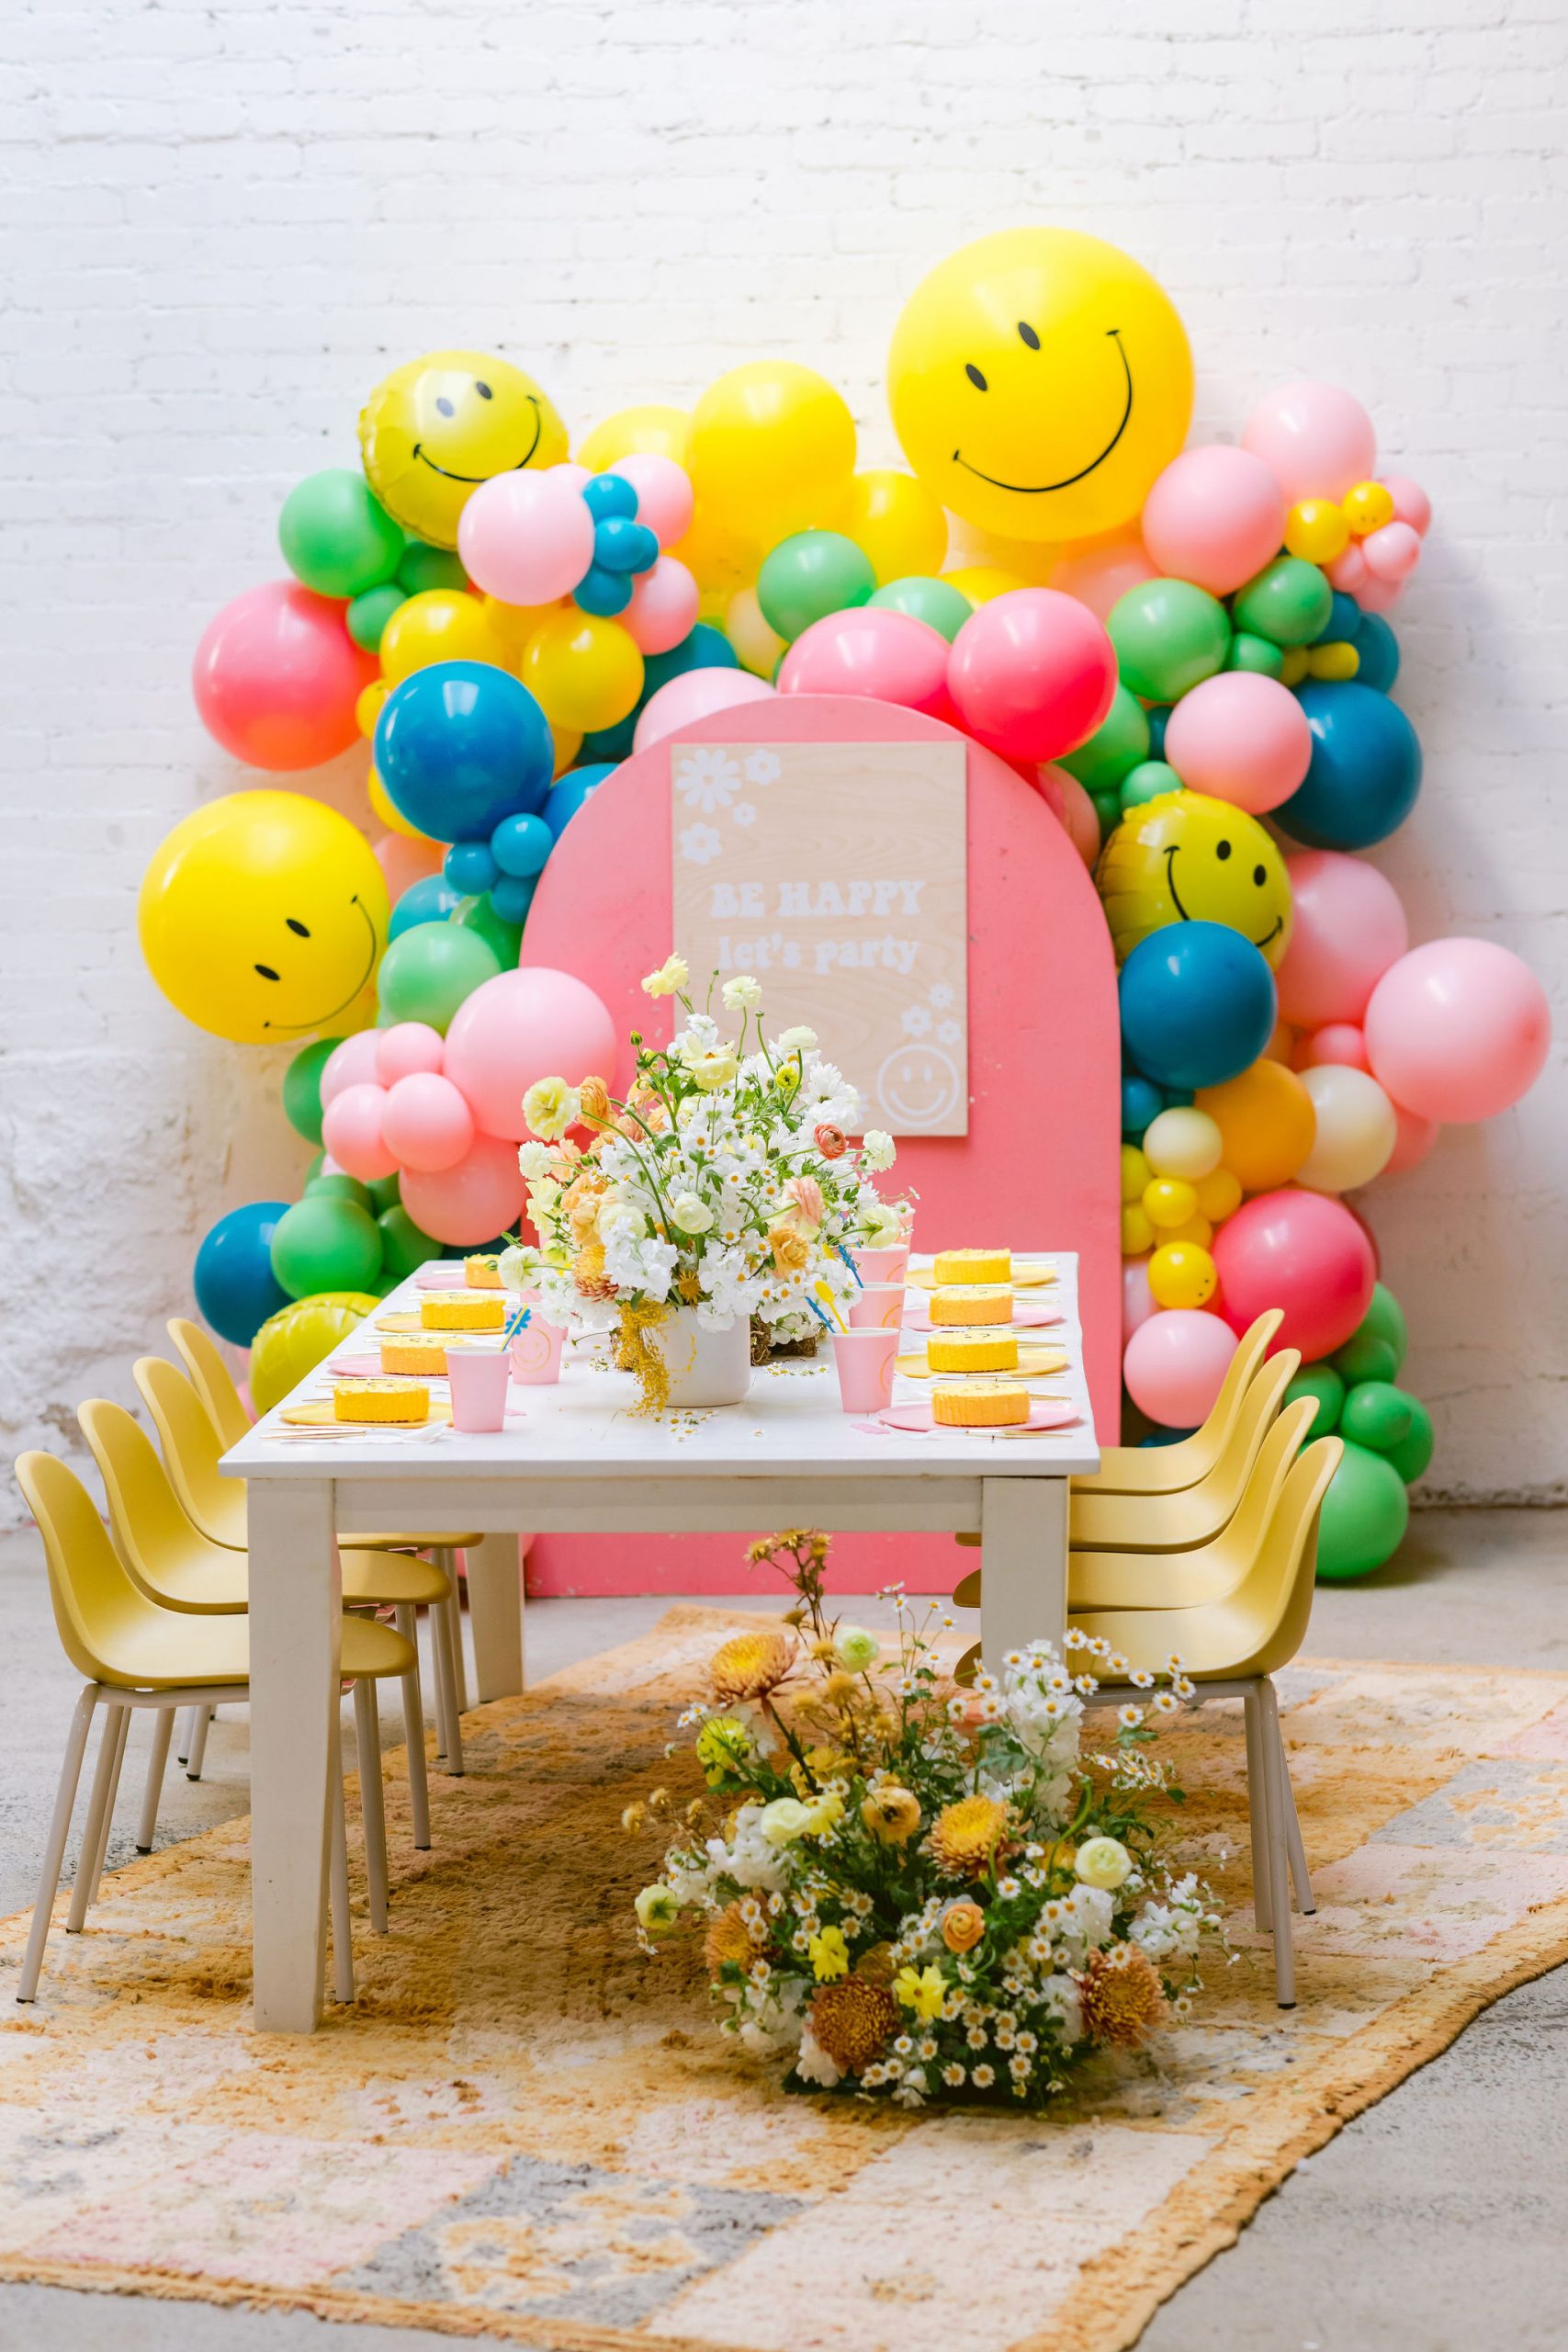 The Happiest Smiley Face Party to Brighten Your Day!